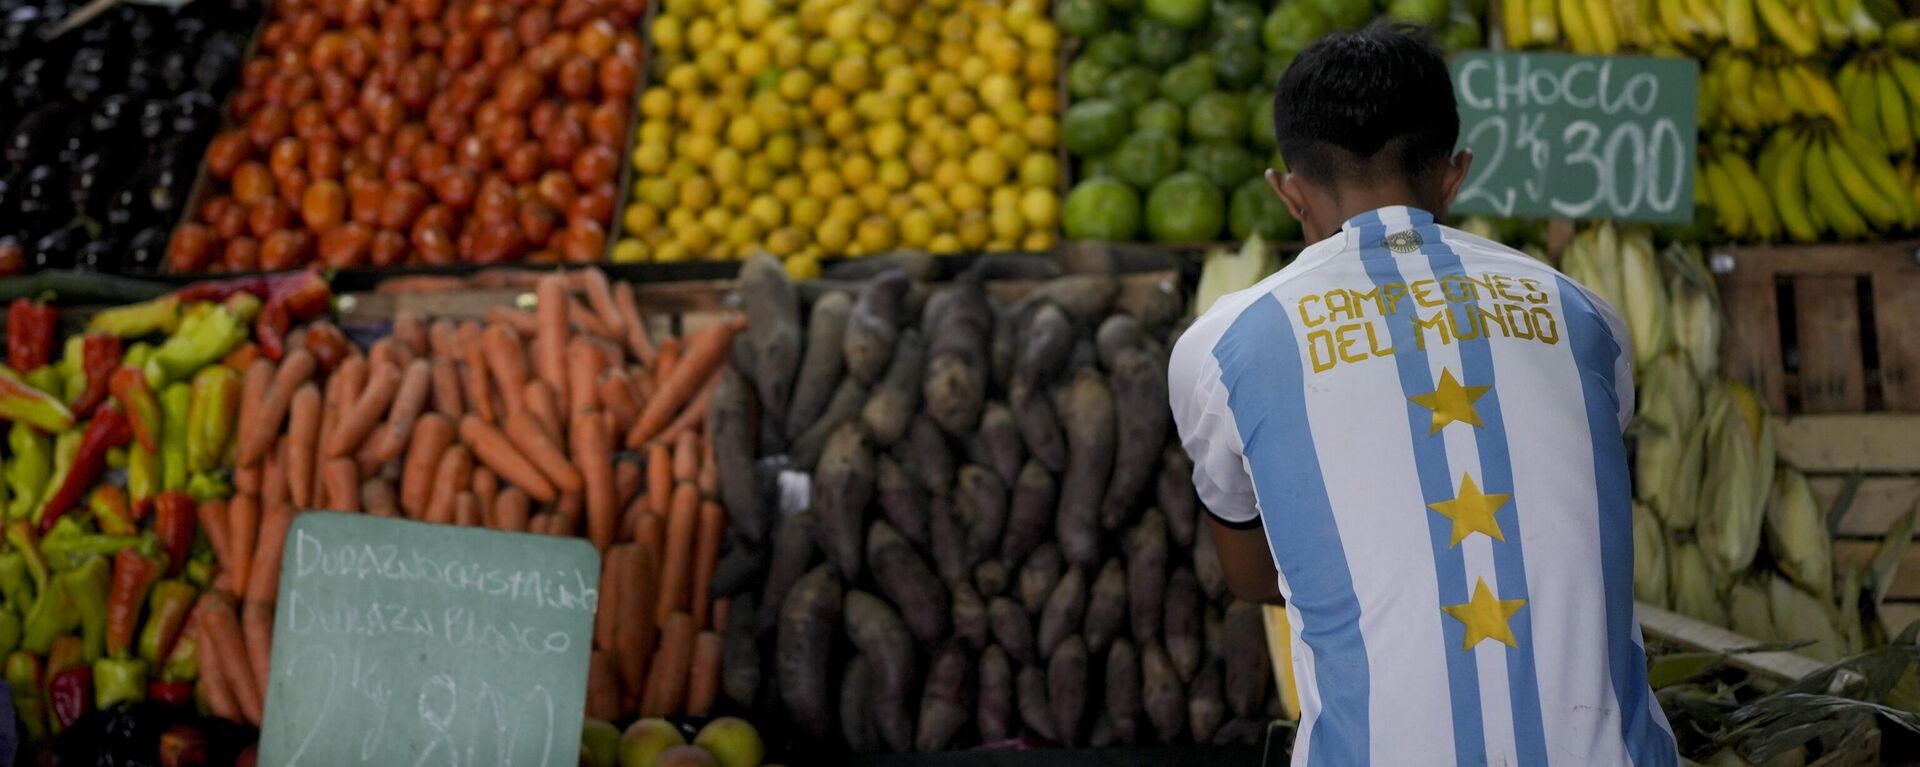 A worker wearing an Argentine soccer jersey that says in Spanish World Champions, referring to Argentina's 2022 World Cup title, arranges vegetables at the central market in Buenos Aires, Argentina, Monday, Feb. 13, 2023. On Feb. 14, the government statistics service (INDEC) will release January's Consumer Price Index for Argentina, which has one of the world's highest inflation rates. - Sputnik International, 1920, 14.03.2023